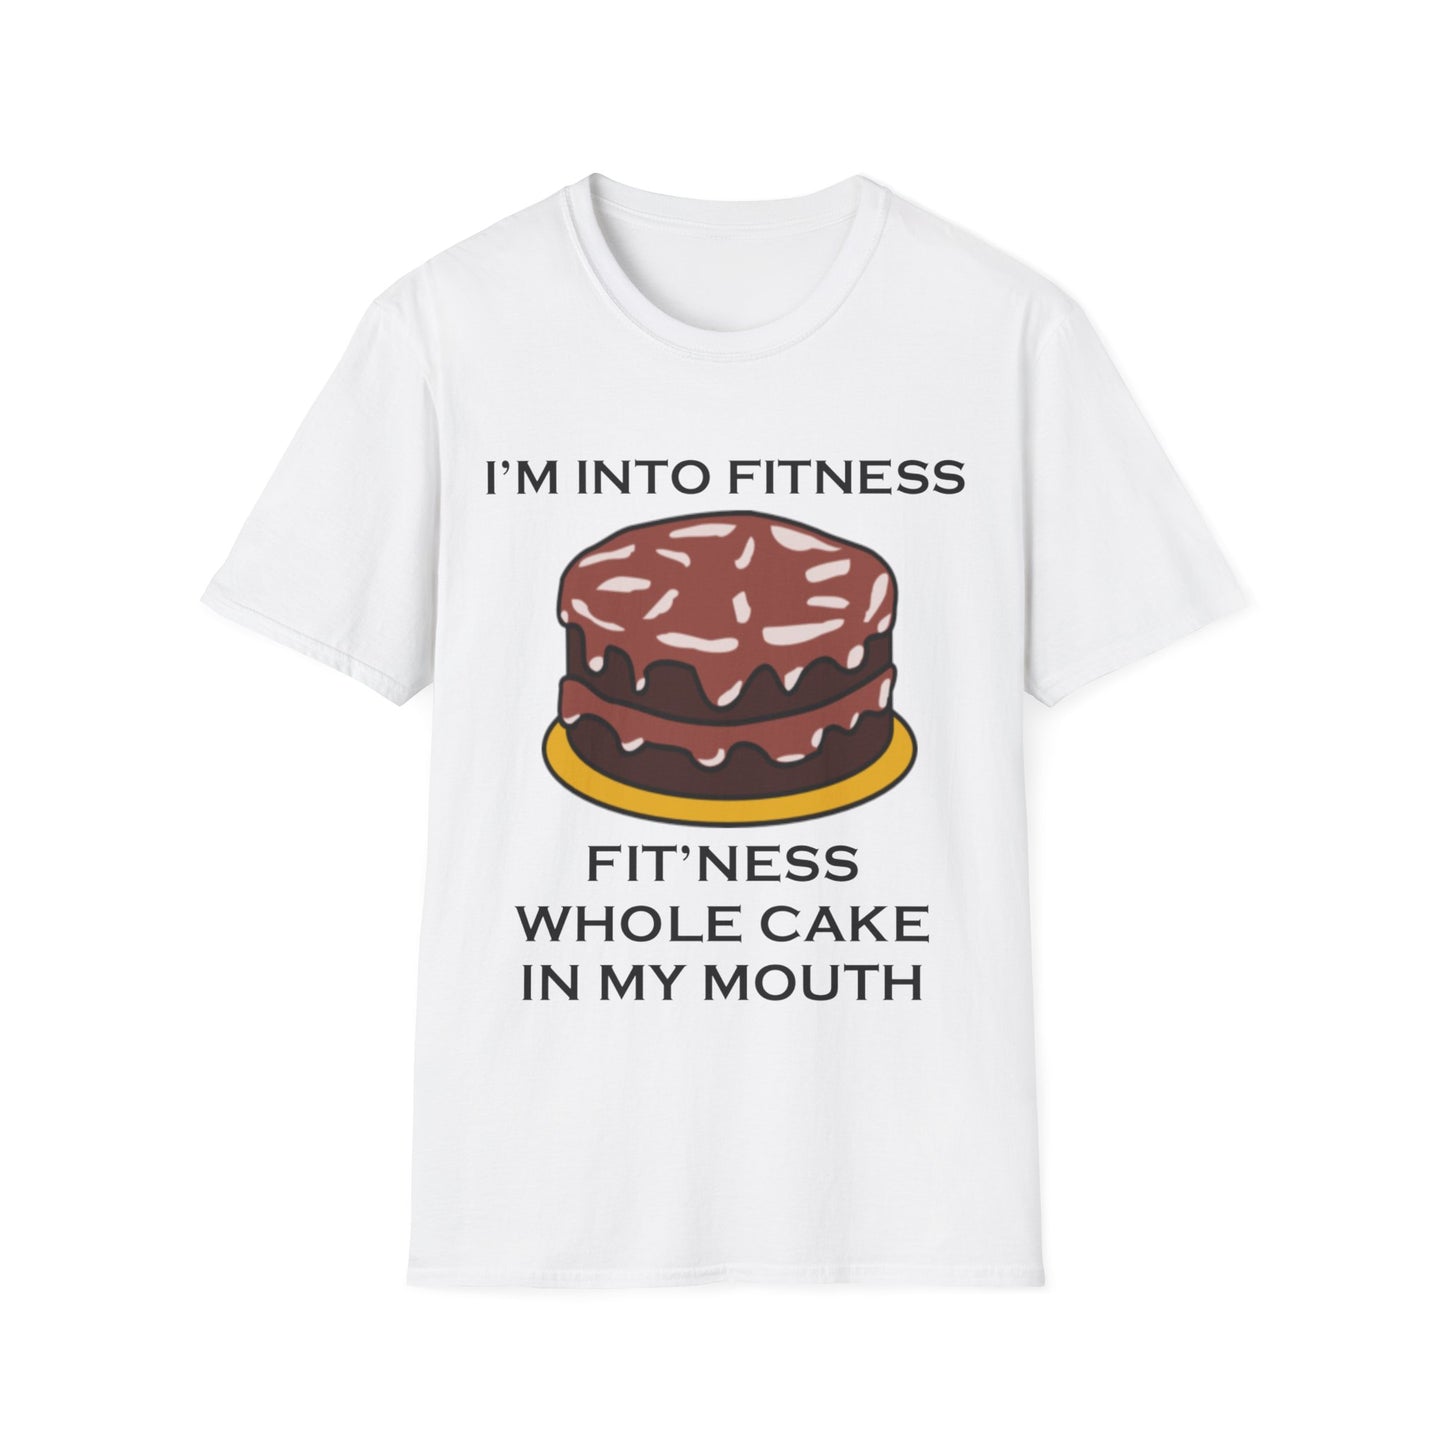 A white t-shirt with a design of a chocolate cake and a funny quote: I'm Into Fitness, Fit'ness Whole Cake In My Mouth